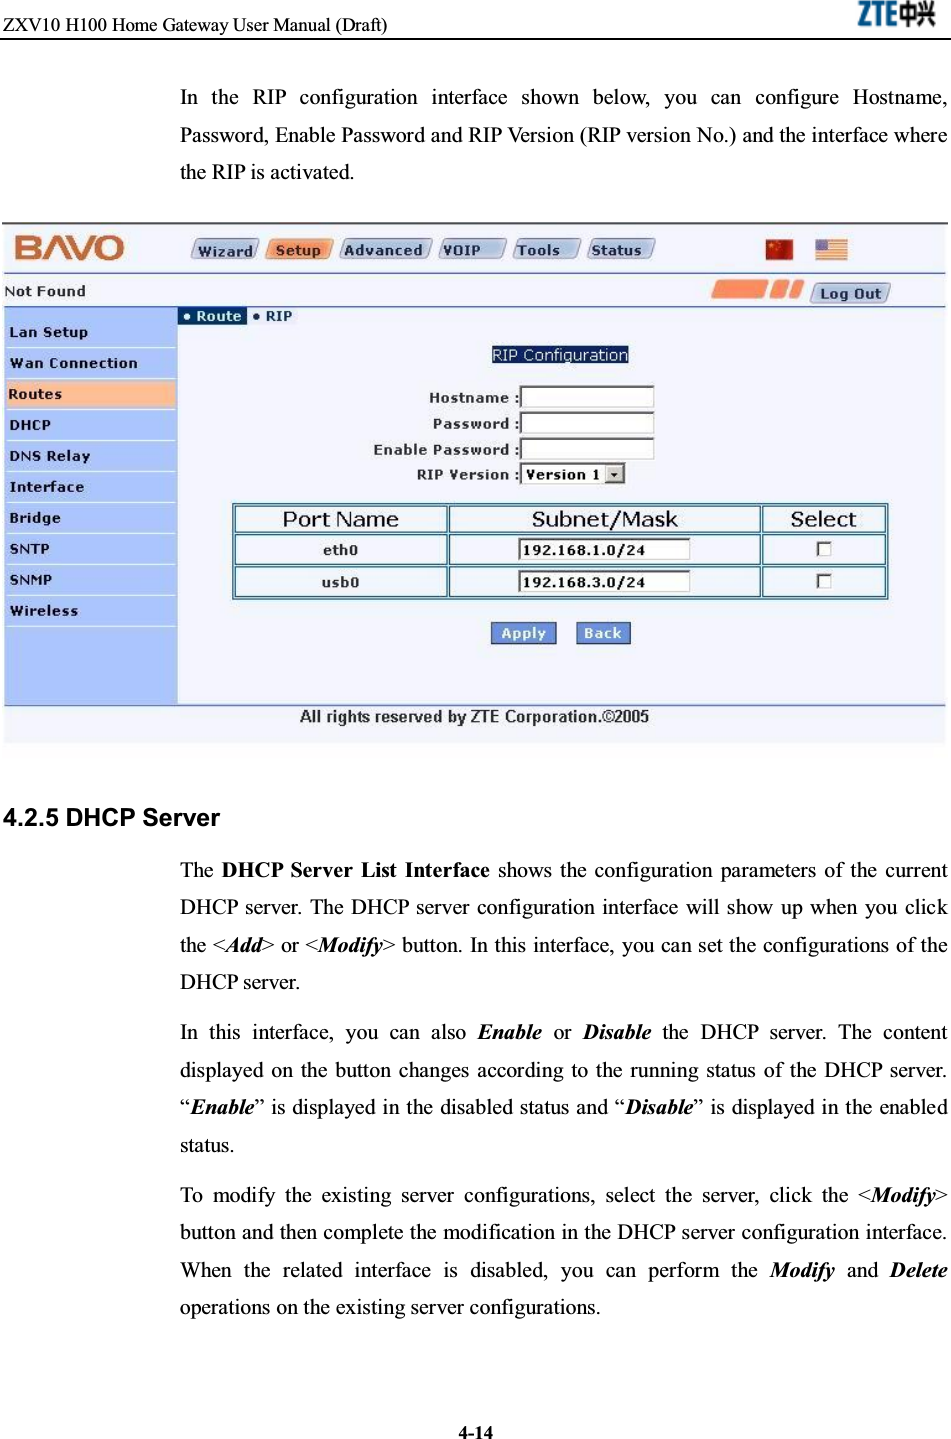 ZXV10 H100 Home Gateway User Manual (Draft)4-14In the RIP configuration interface shown below, you can configure Hostname,Password, Enable Password and RIP Version (RIP version No.) and the interface wherethe RIP is activated.4.2.5 DHCP ServerThe DHCP Server List Interface shows the configuration parameters of the currentDHCP server. The DHCP server configuration interface will show up when you clickthe &lt;Add&gt;or &lt;Modify&gt; button. In this interface, you can set the configurations of theDHCP server.In this interface, you can also Enable or Disable the DHCP server. The contentdisplayed on the button changes according to the running status of the DHCP server.“Enable” is displayed in the disabled status and “Disable” is displayed in the enabledstatus.To modify the existing server configurations, select the server, click the &lt;Modify&gt;button and then complete the modification in the DHCP server configuration interface.When the related interface is disabled, you can perform the Modify and Deleteoperations on the existing server configurations.